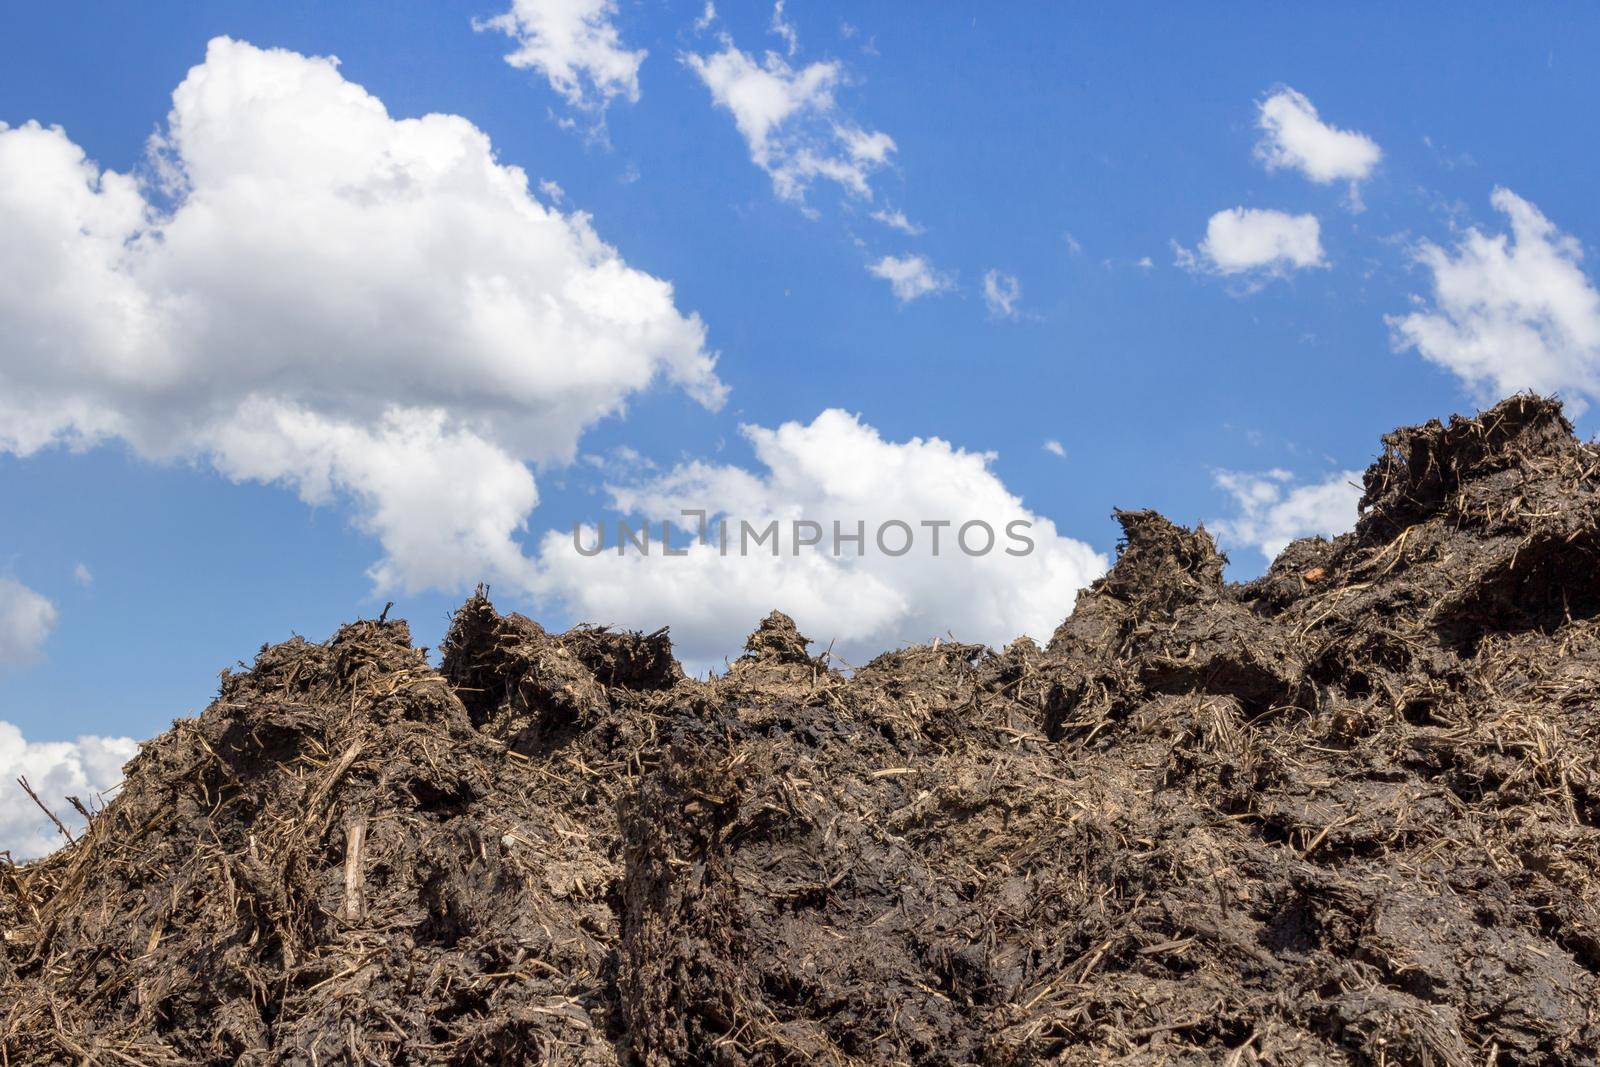 Pile of raw manure on the farmyard. Close up of pile of manure against a blue sky with white clouds. Traditional rural scene.